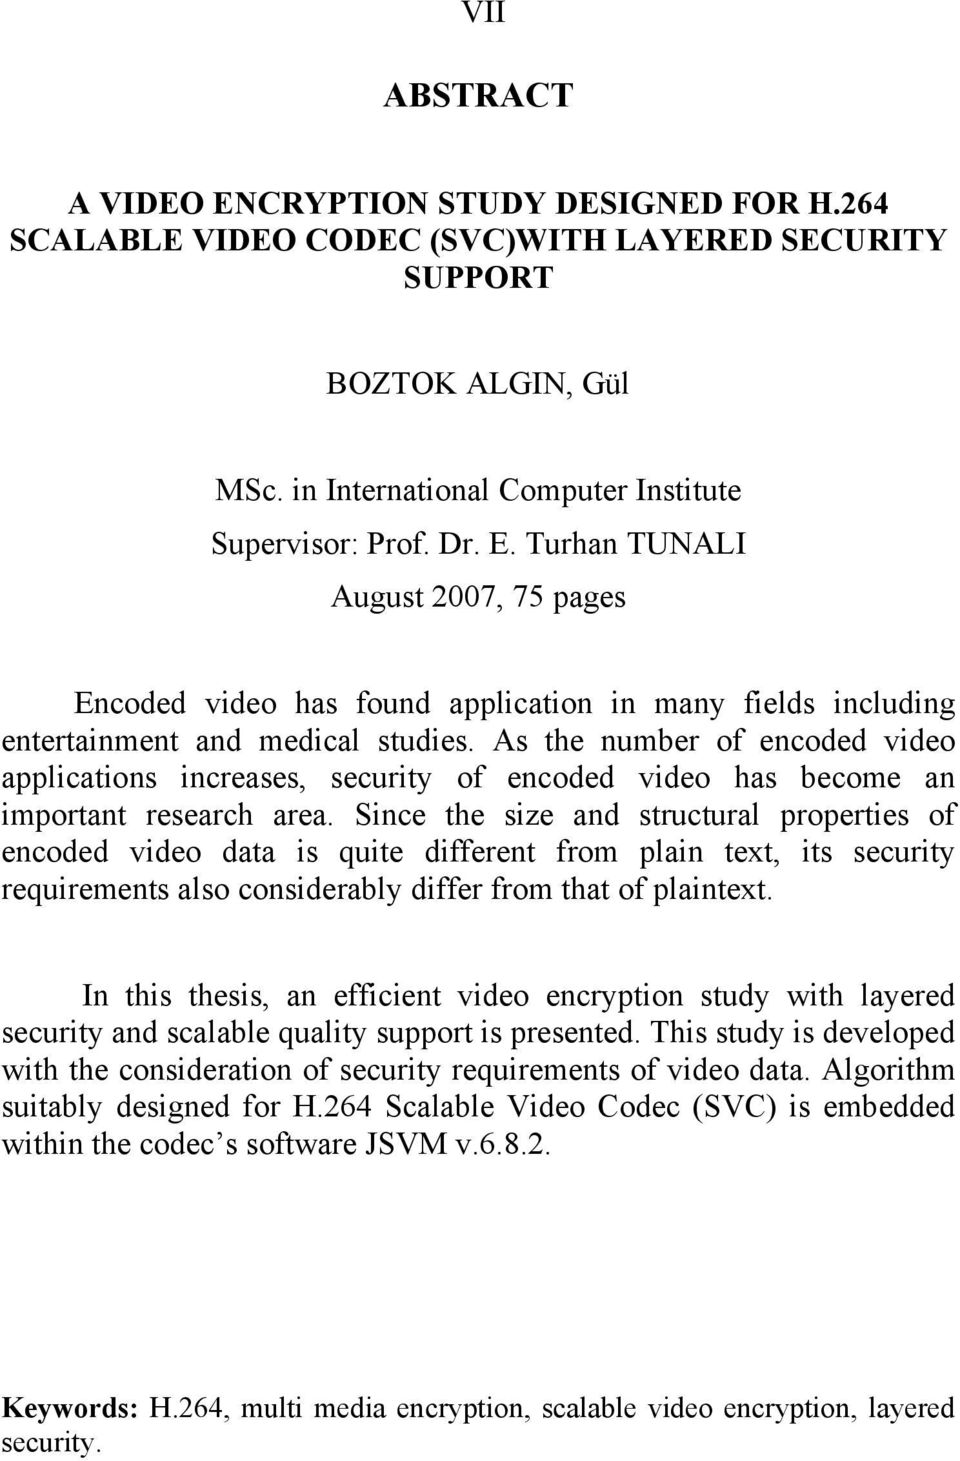 Since the size and structural properties of encoded video data is quite different from plain text, its security requirements also considerably differ from that of plaintext.